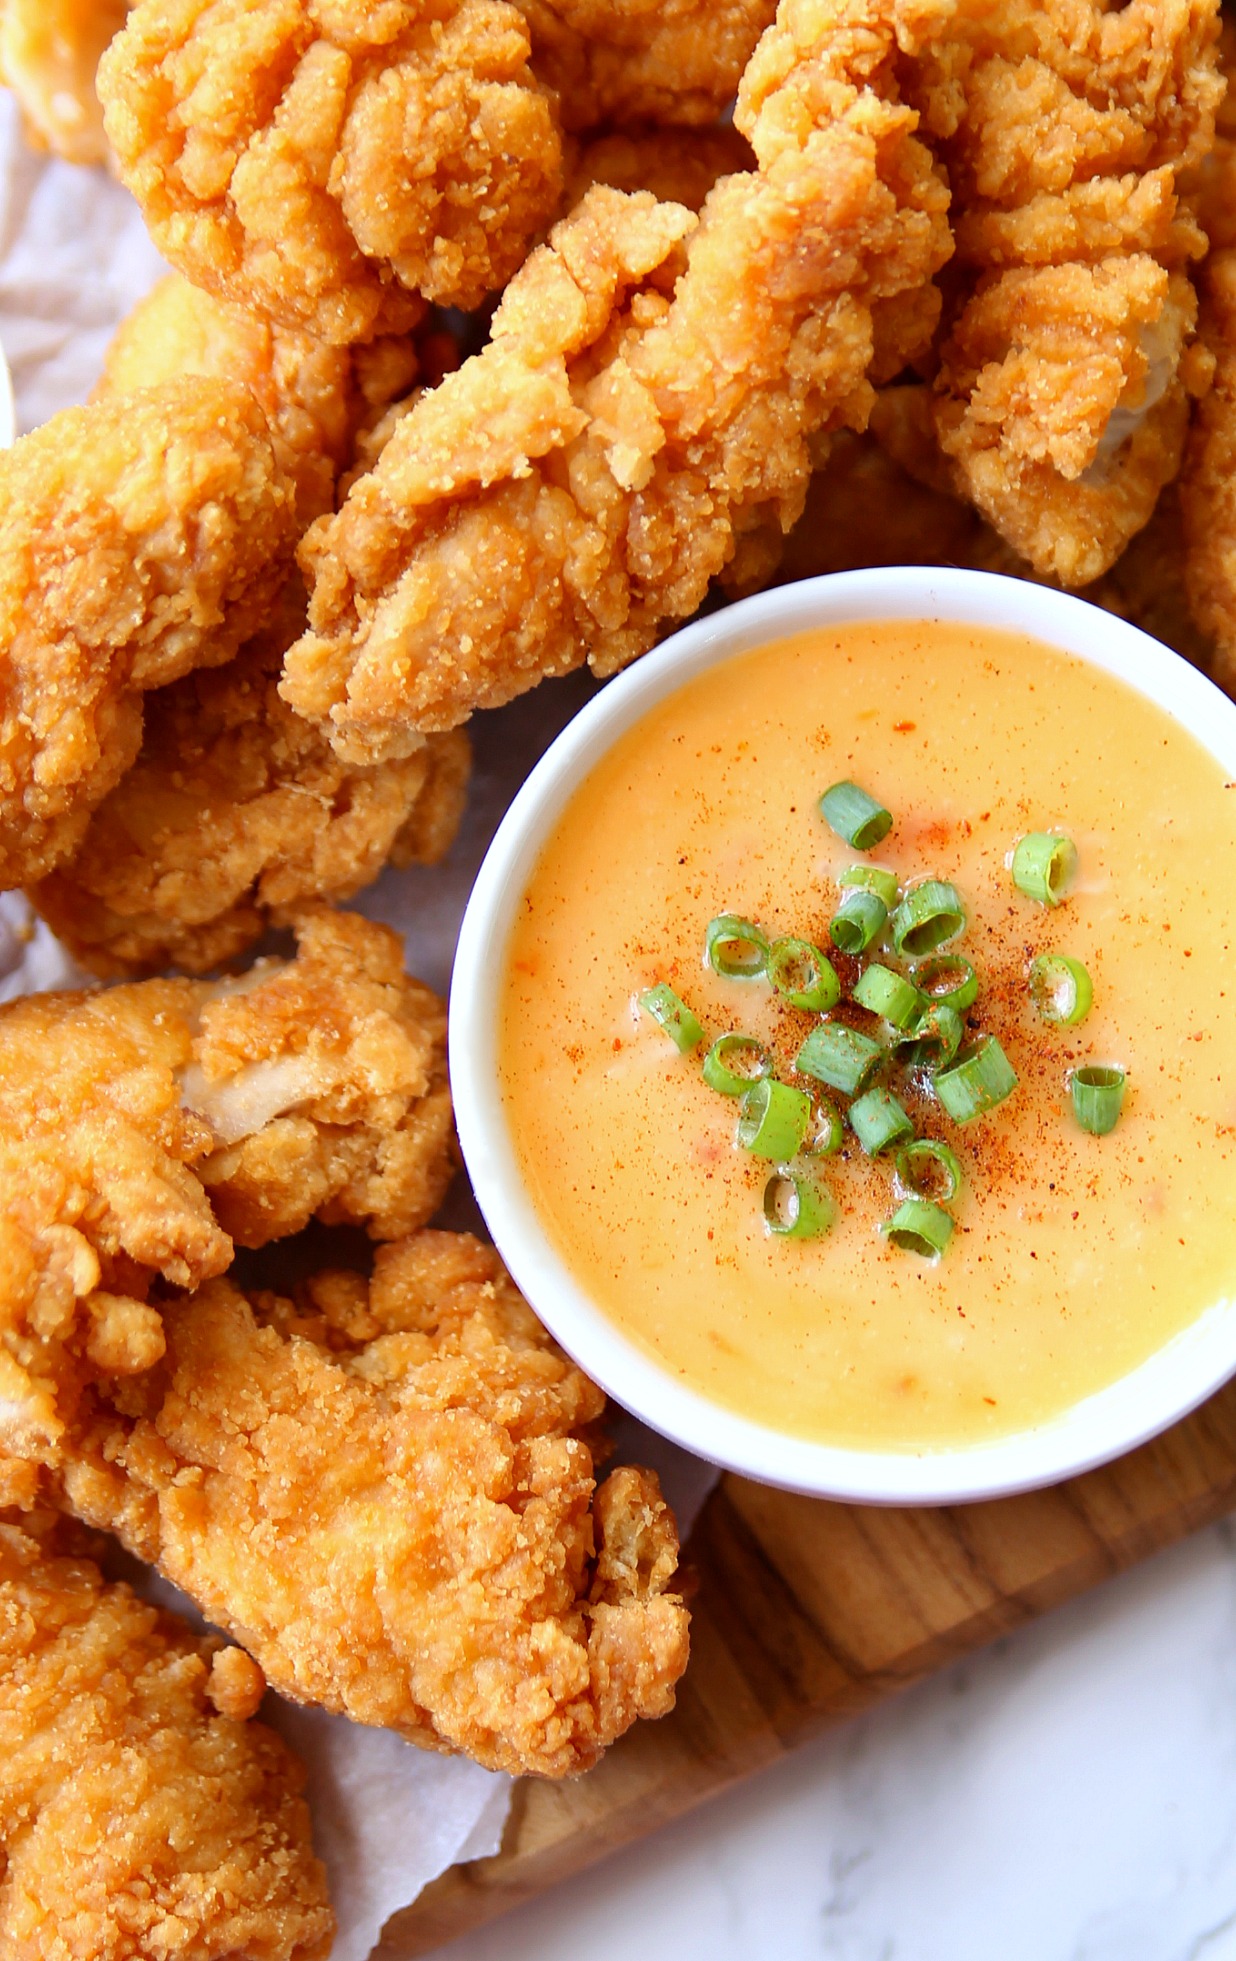 Bang Bang Sauce - The Best Dipping Sauce! - Happy-Go-Lucky